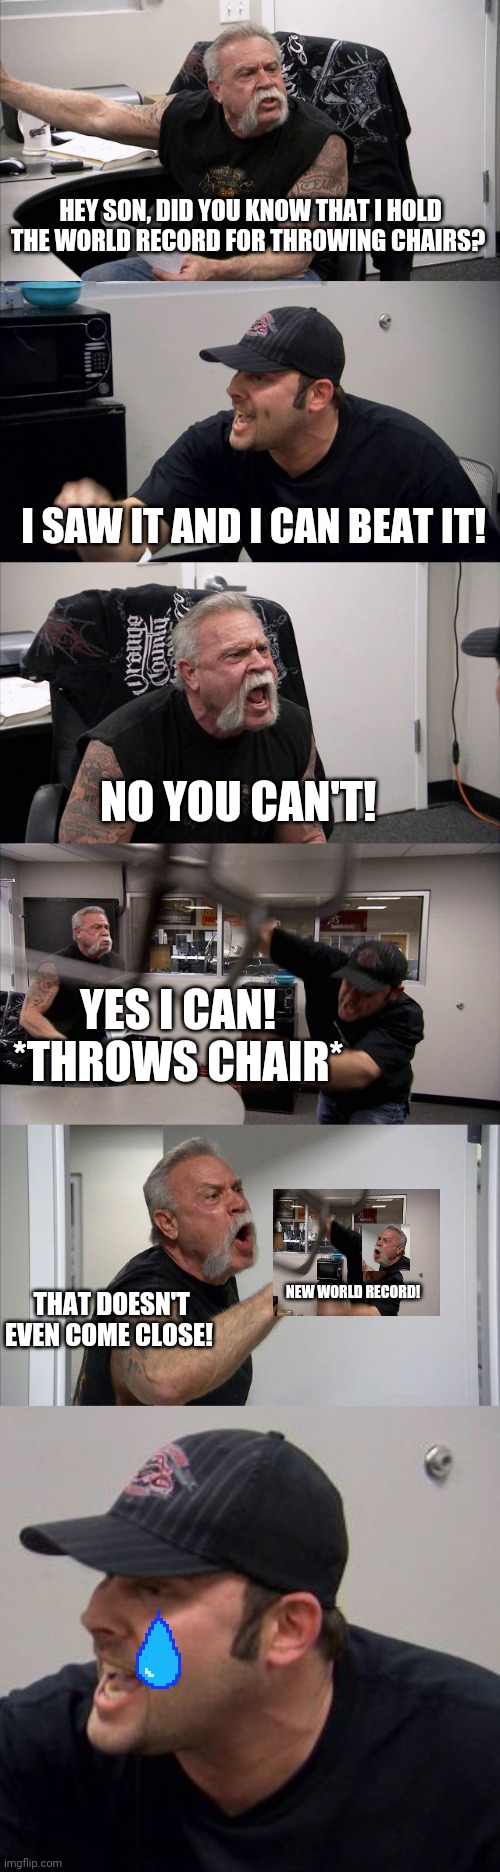 HEY SON, DID YOU KNOW THAT I HOLD THE WORLD RECORD FOR THROWING CHAIRS? I SAW IT AND I CAN BEAT IT! NO YOU CAN'T! YES I CAN! *THROWS CHAIR*; THAT DOESN'T EVEN COME CLOSE! NEW WORLD RECORD! | image tagged in memes,american chopper argument,chair,world record | made w/ Imgflip meme maker